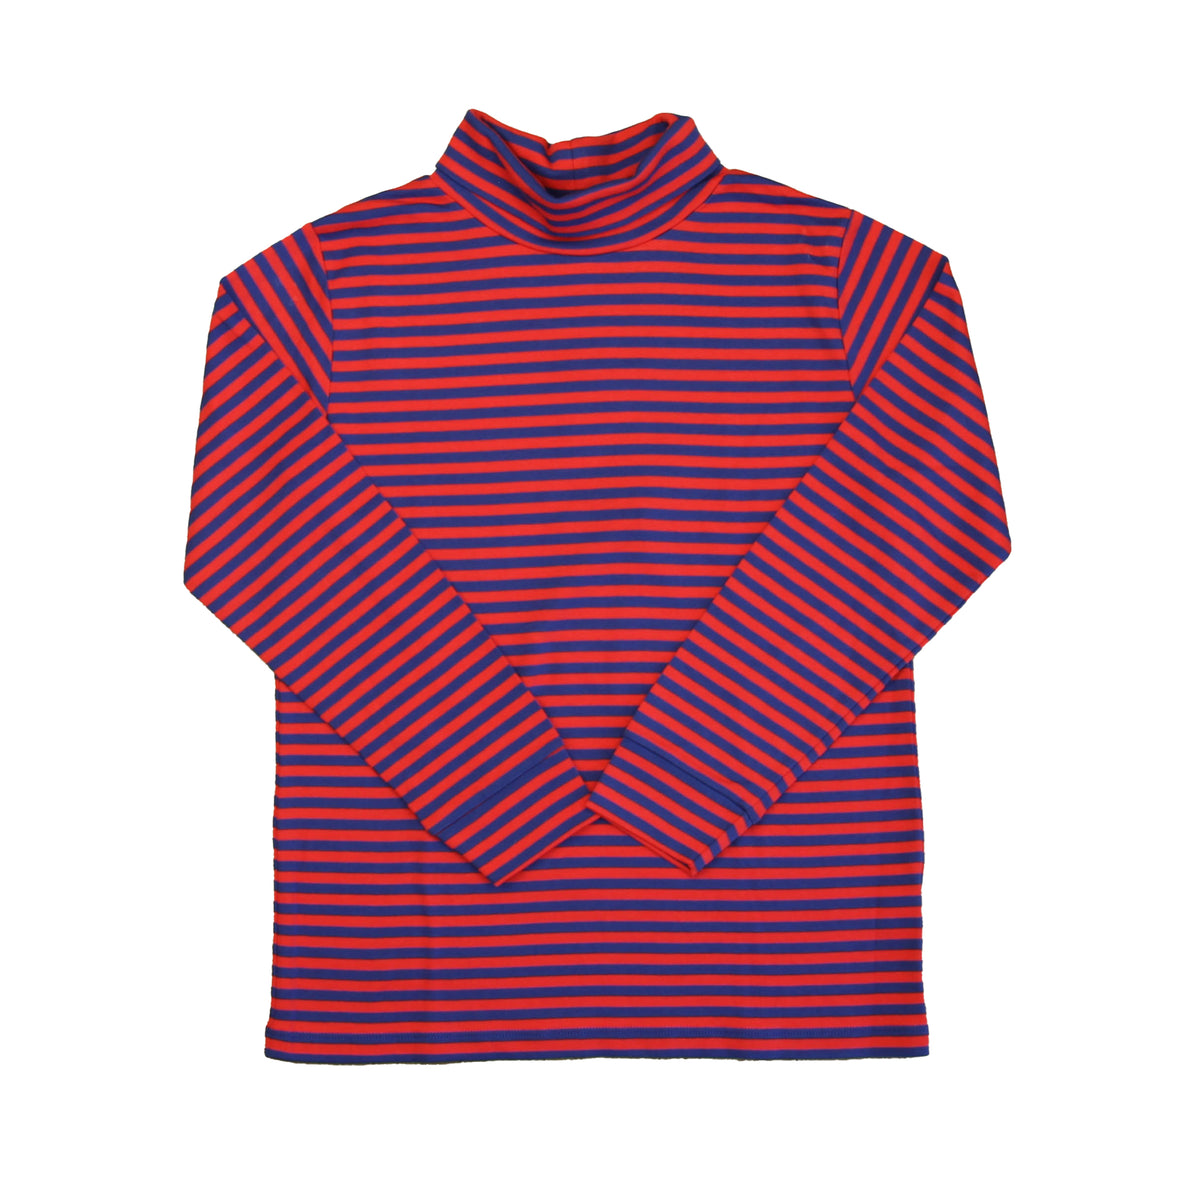 New with Tags: Tomato and Bright Navy Top size: 6-14 Years -- FINAL SALE